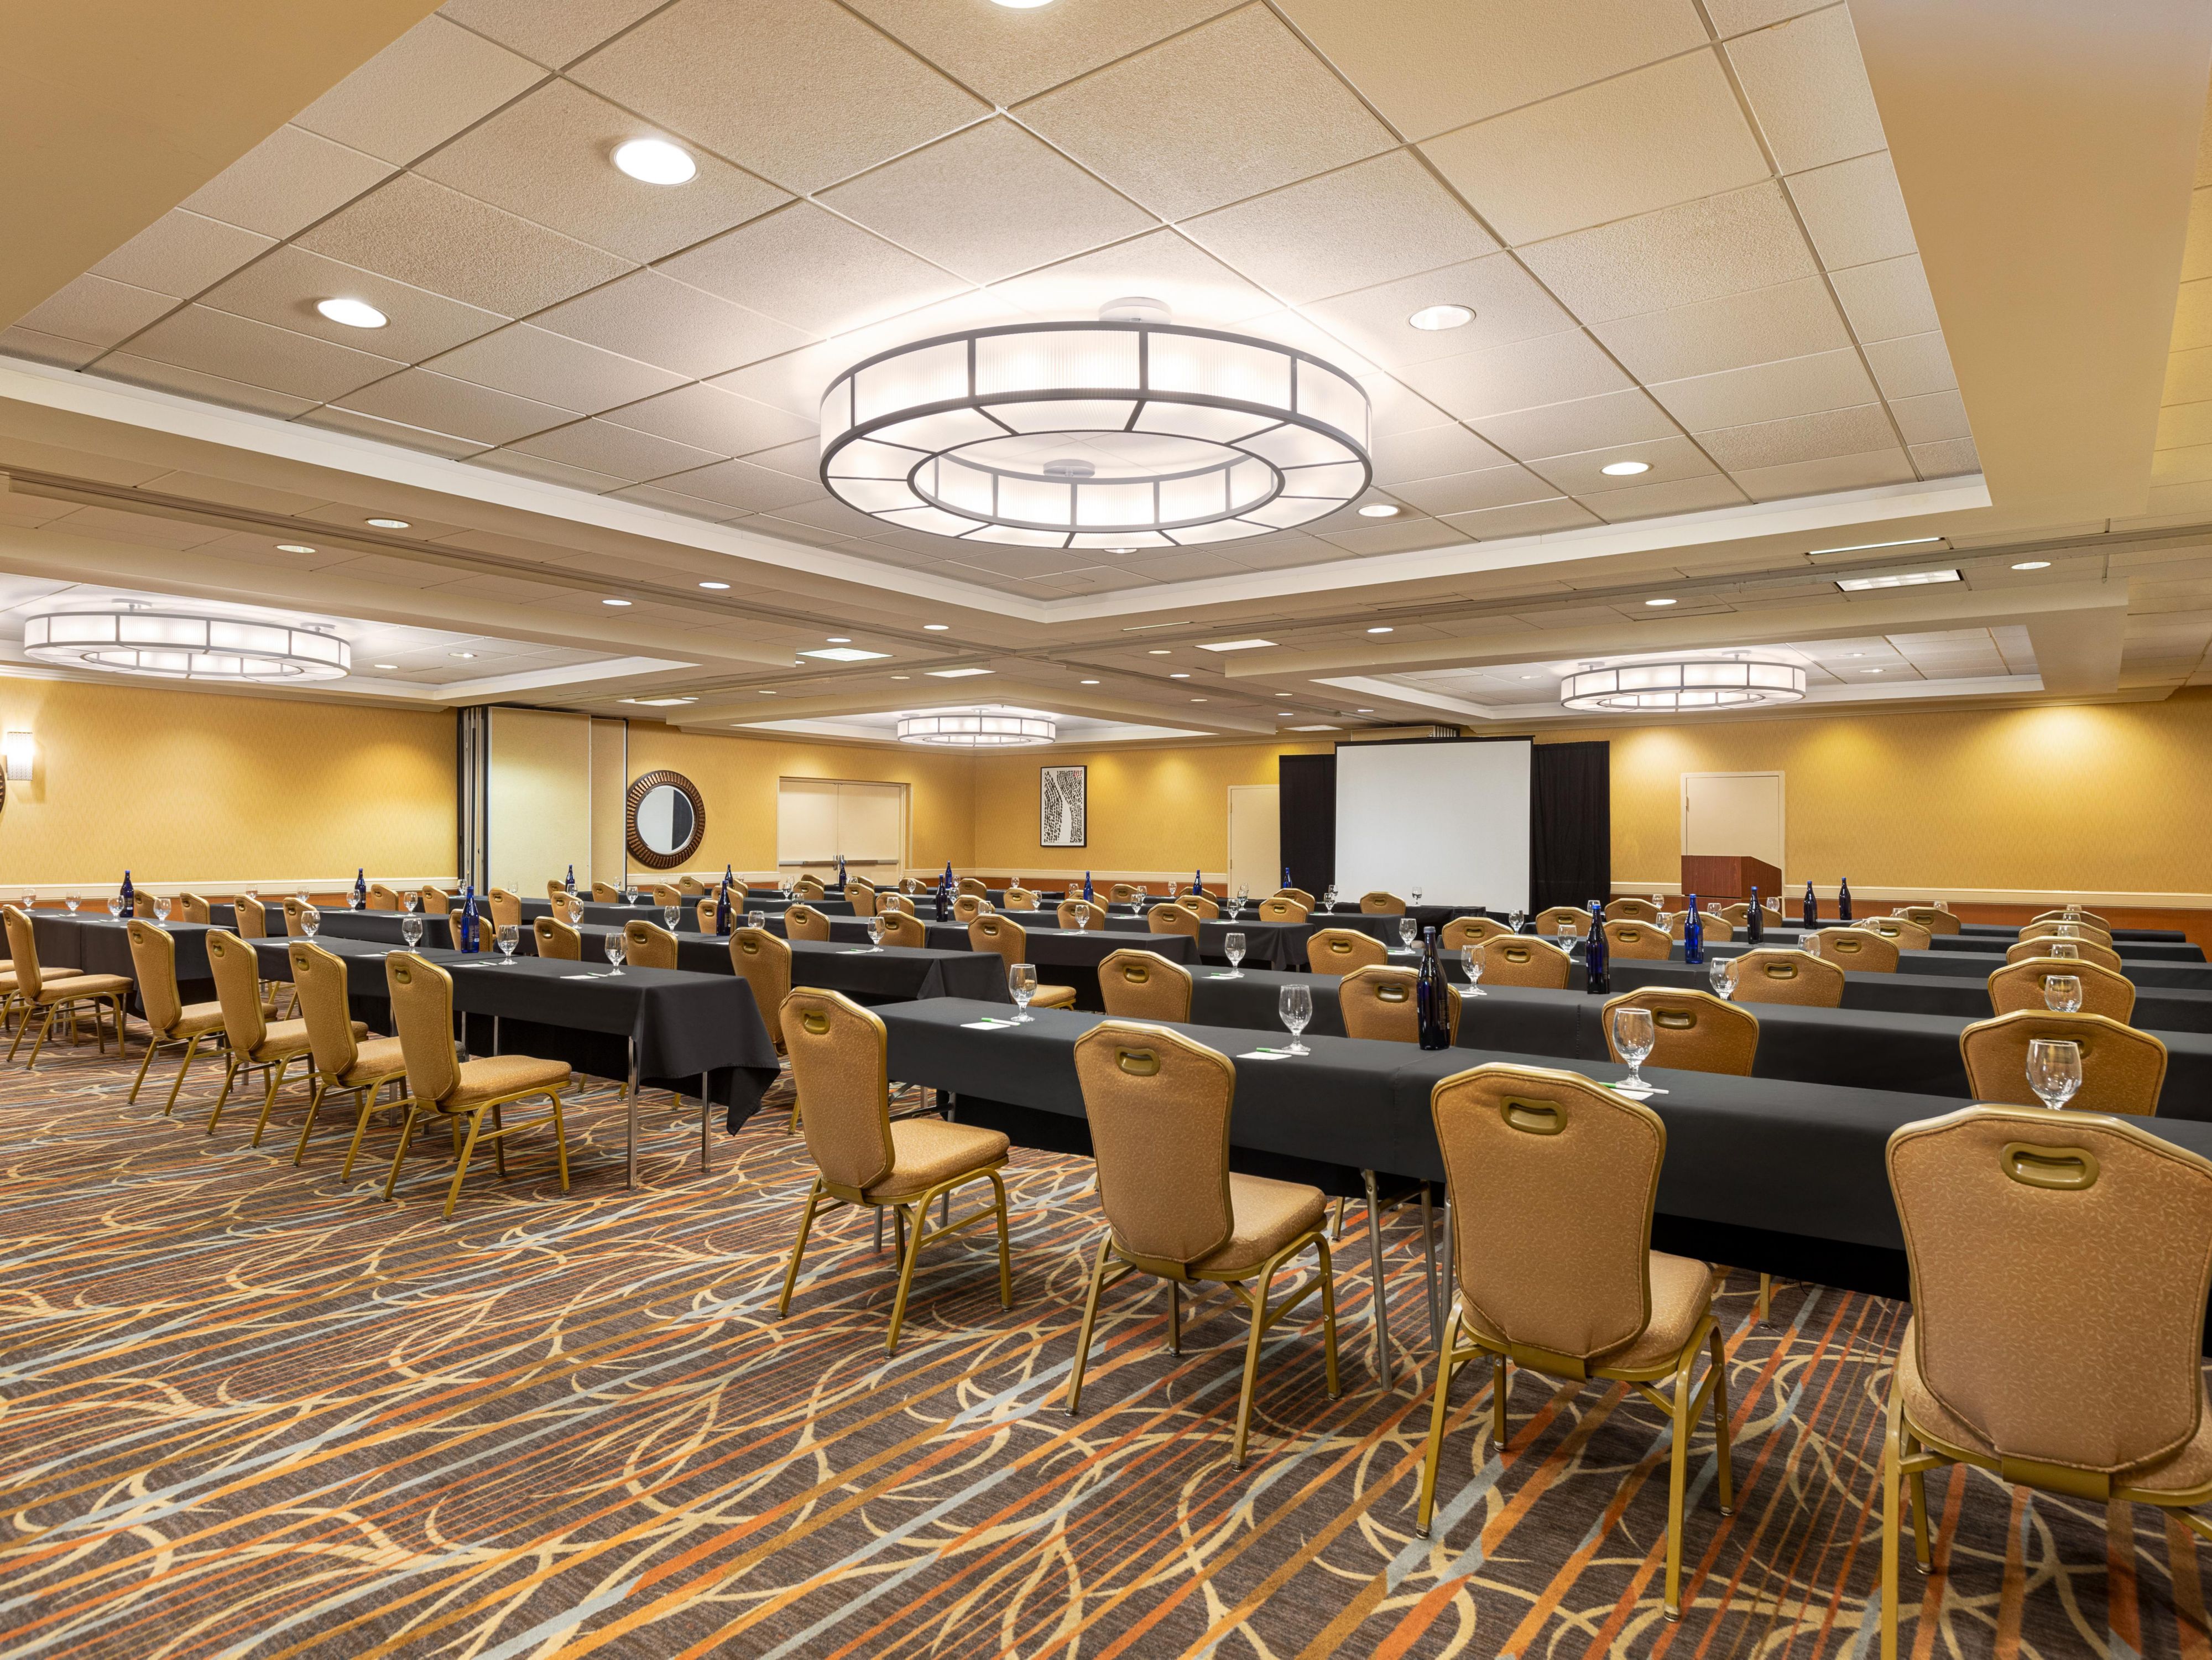 Our hotel features 7,700 square feet of flexible meeting space, along with a skilled team of planning and service professionals who strive to ensure your next meeting, conference, or social gathering is a success. Choose the perfect space and set-up for your individual needs and customize a catering menu to complement your meeting.